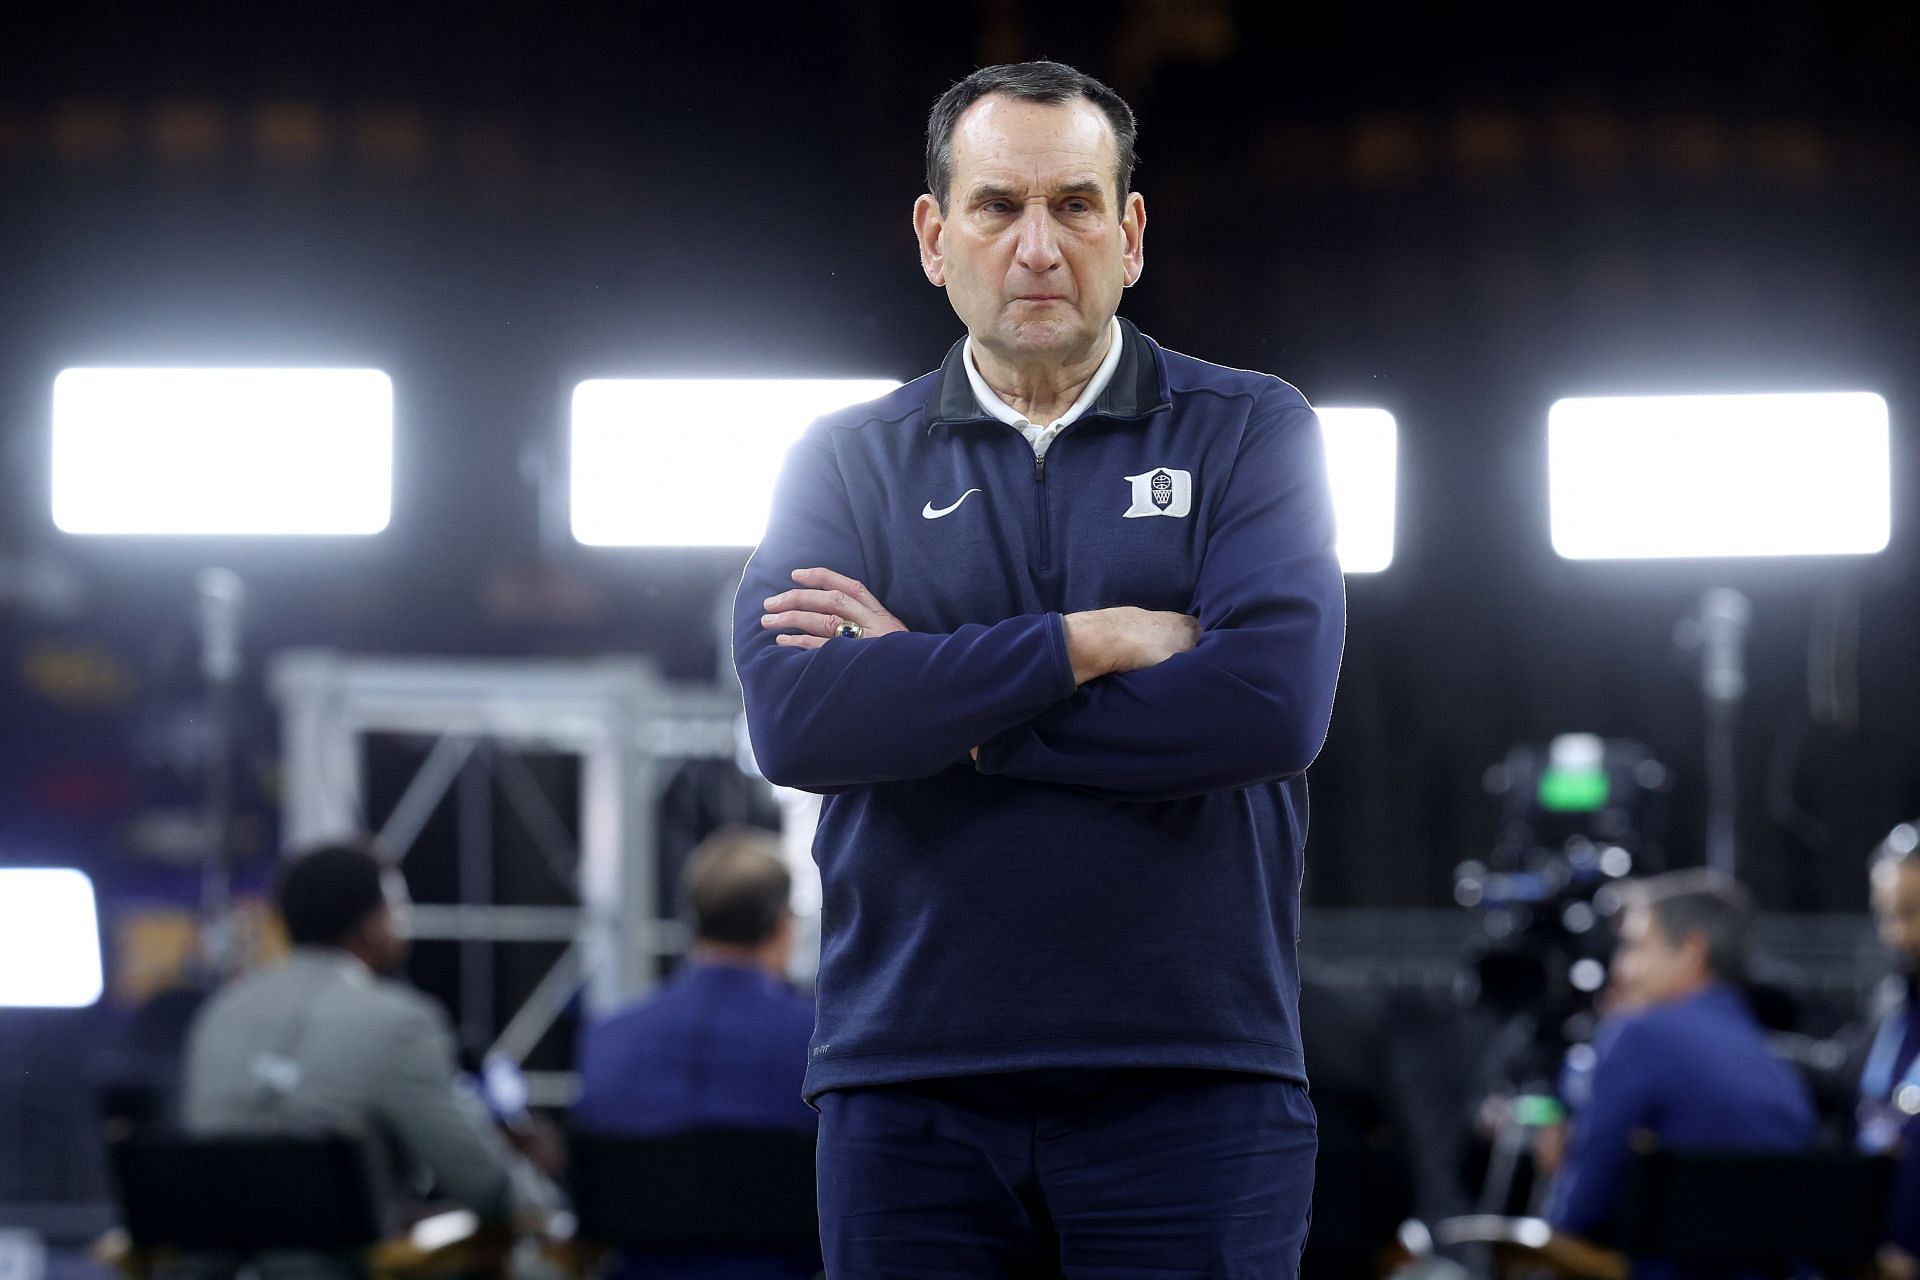 Coach K prepares for his last Final Four appearance with Duke